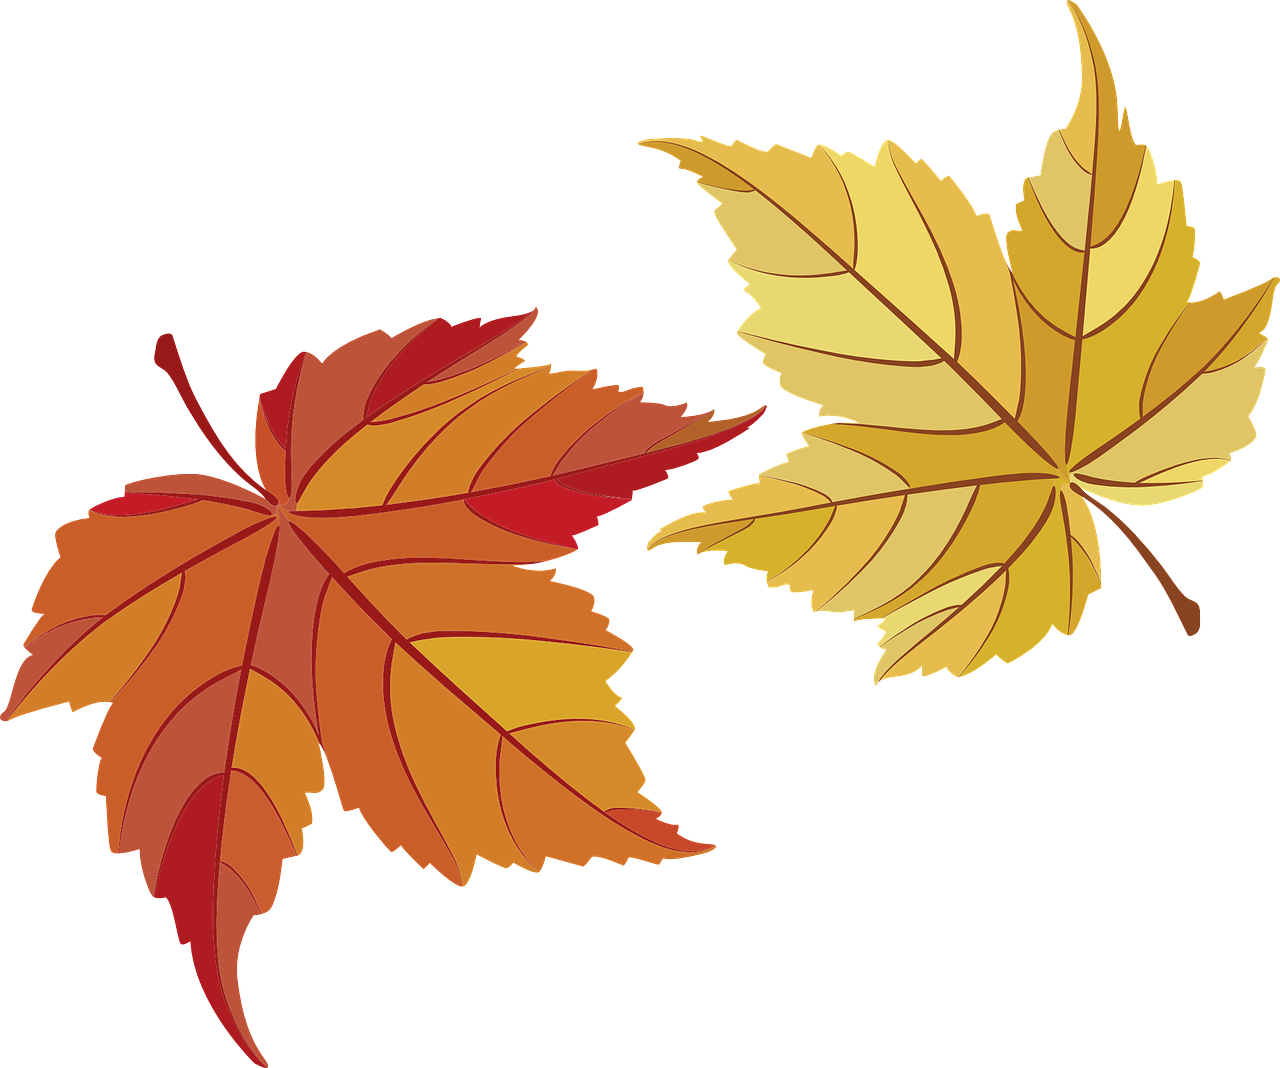 How to draw a leaf 19 ideas beautiful drawings of leaves HOWTODRAW